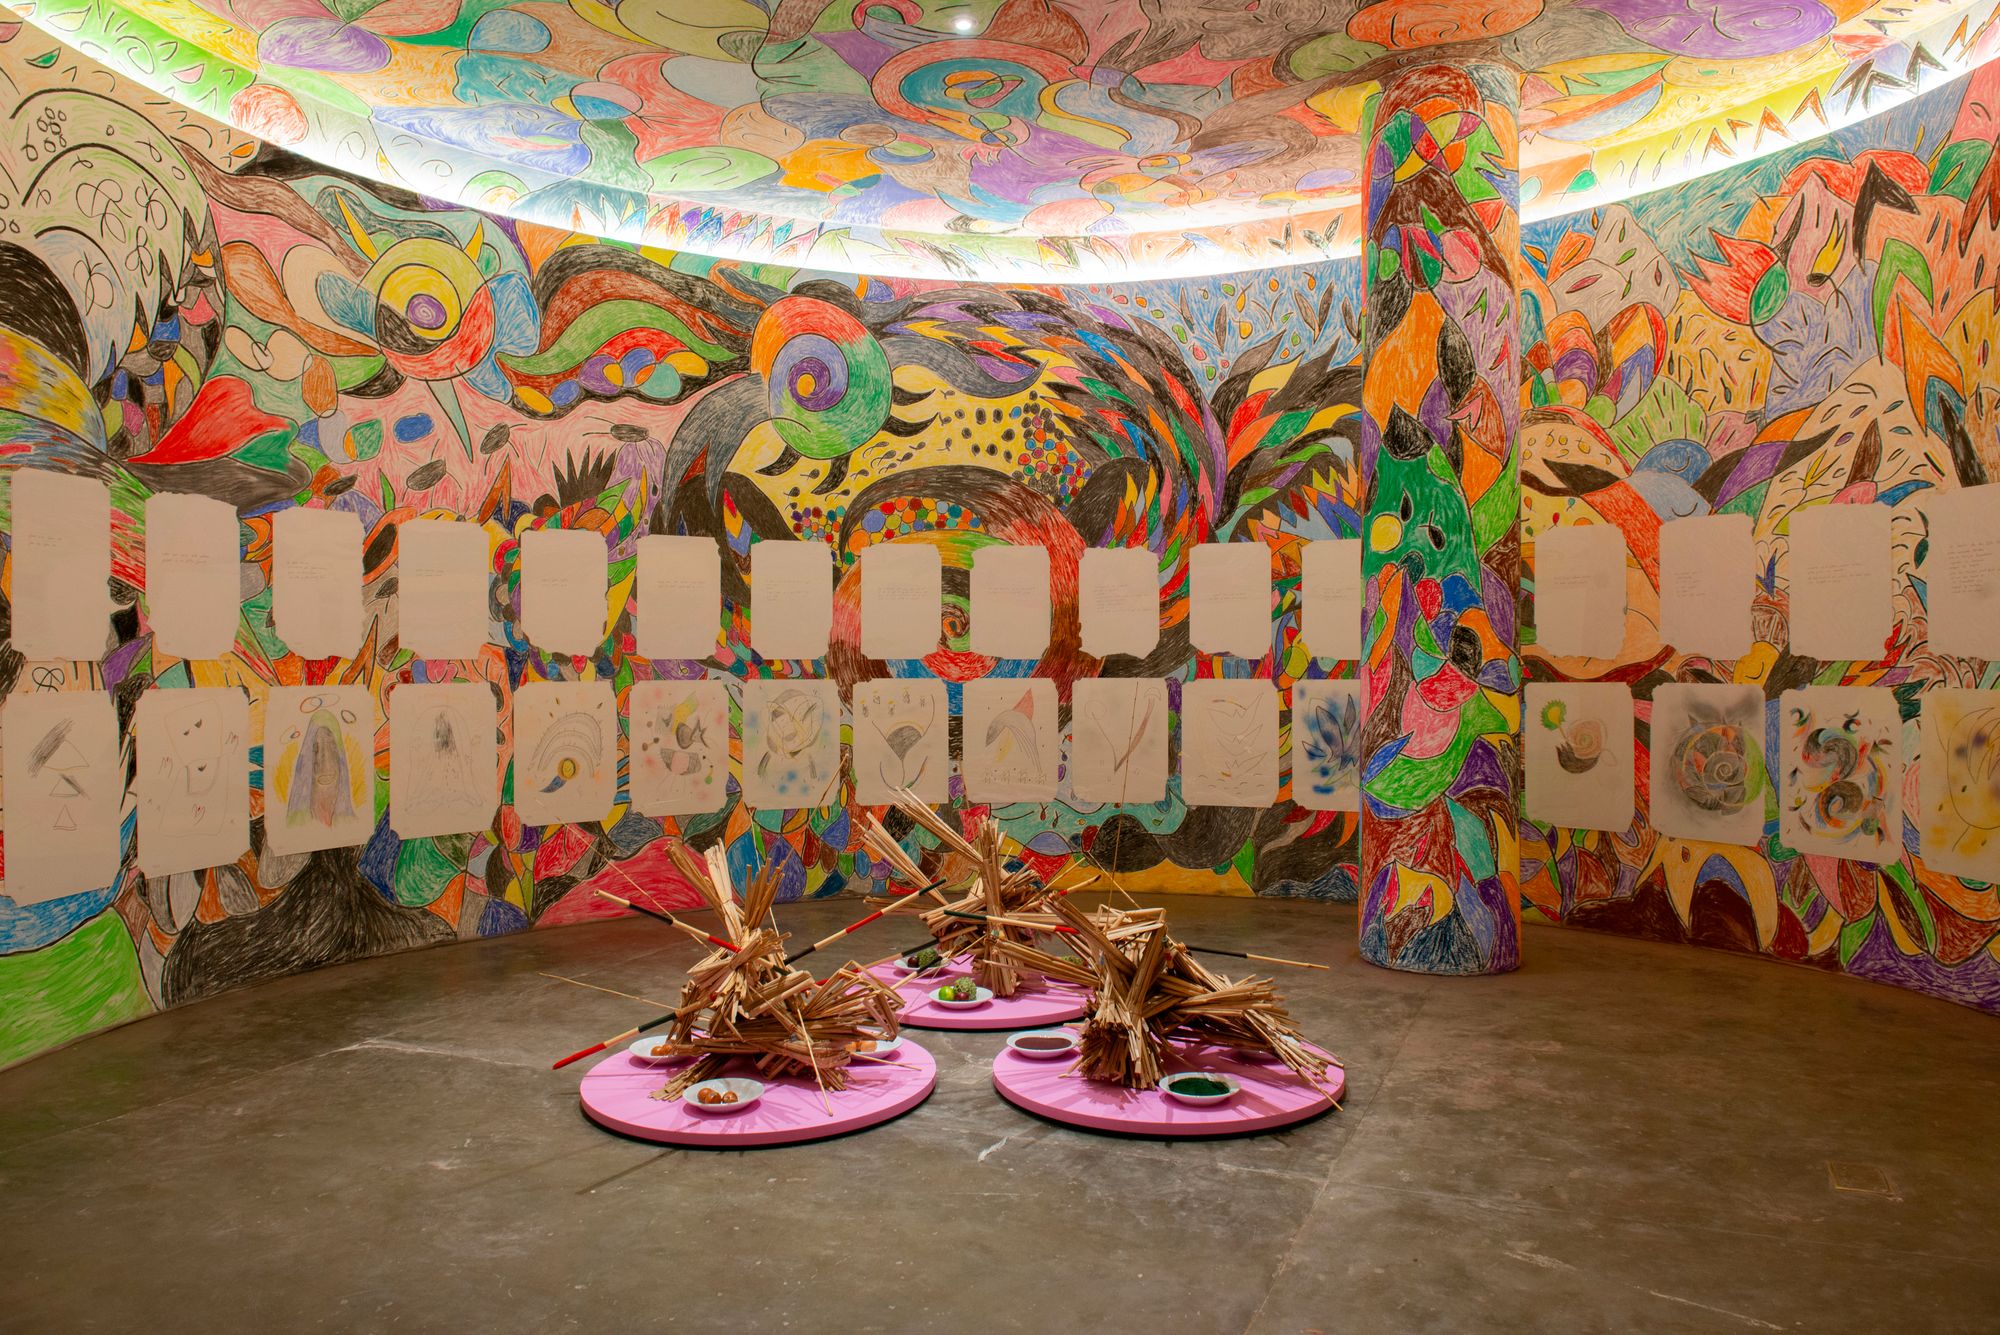 A colorful room where the walls and celing are rounded and covered in vibrant designs.